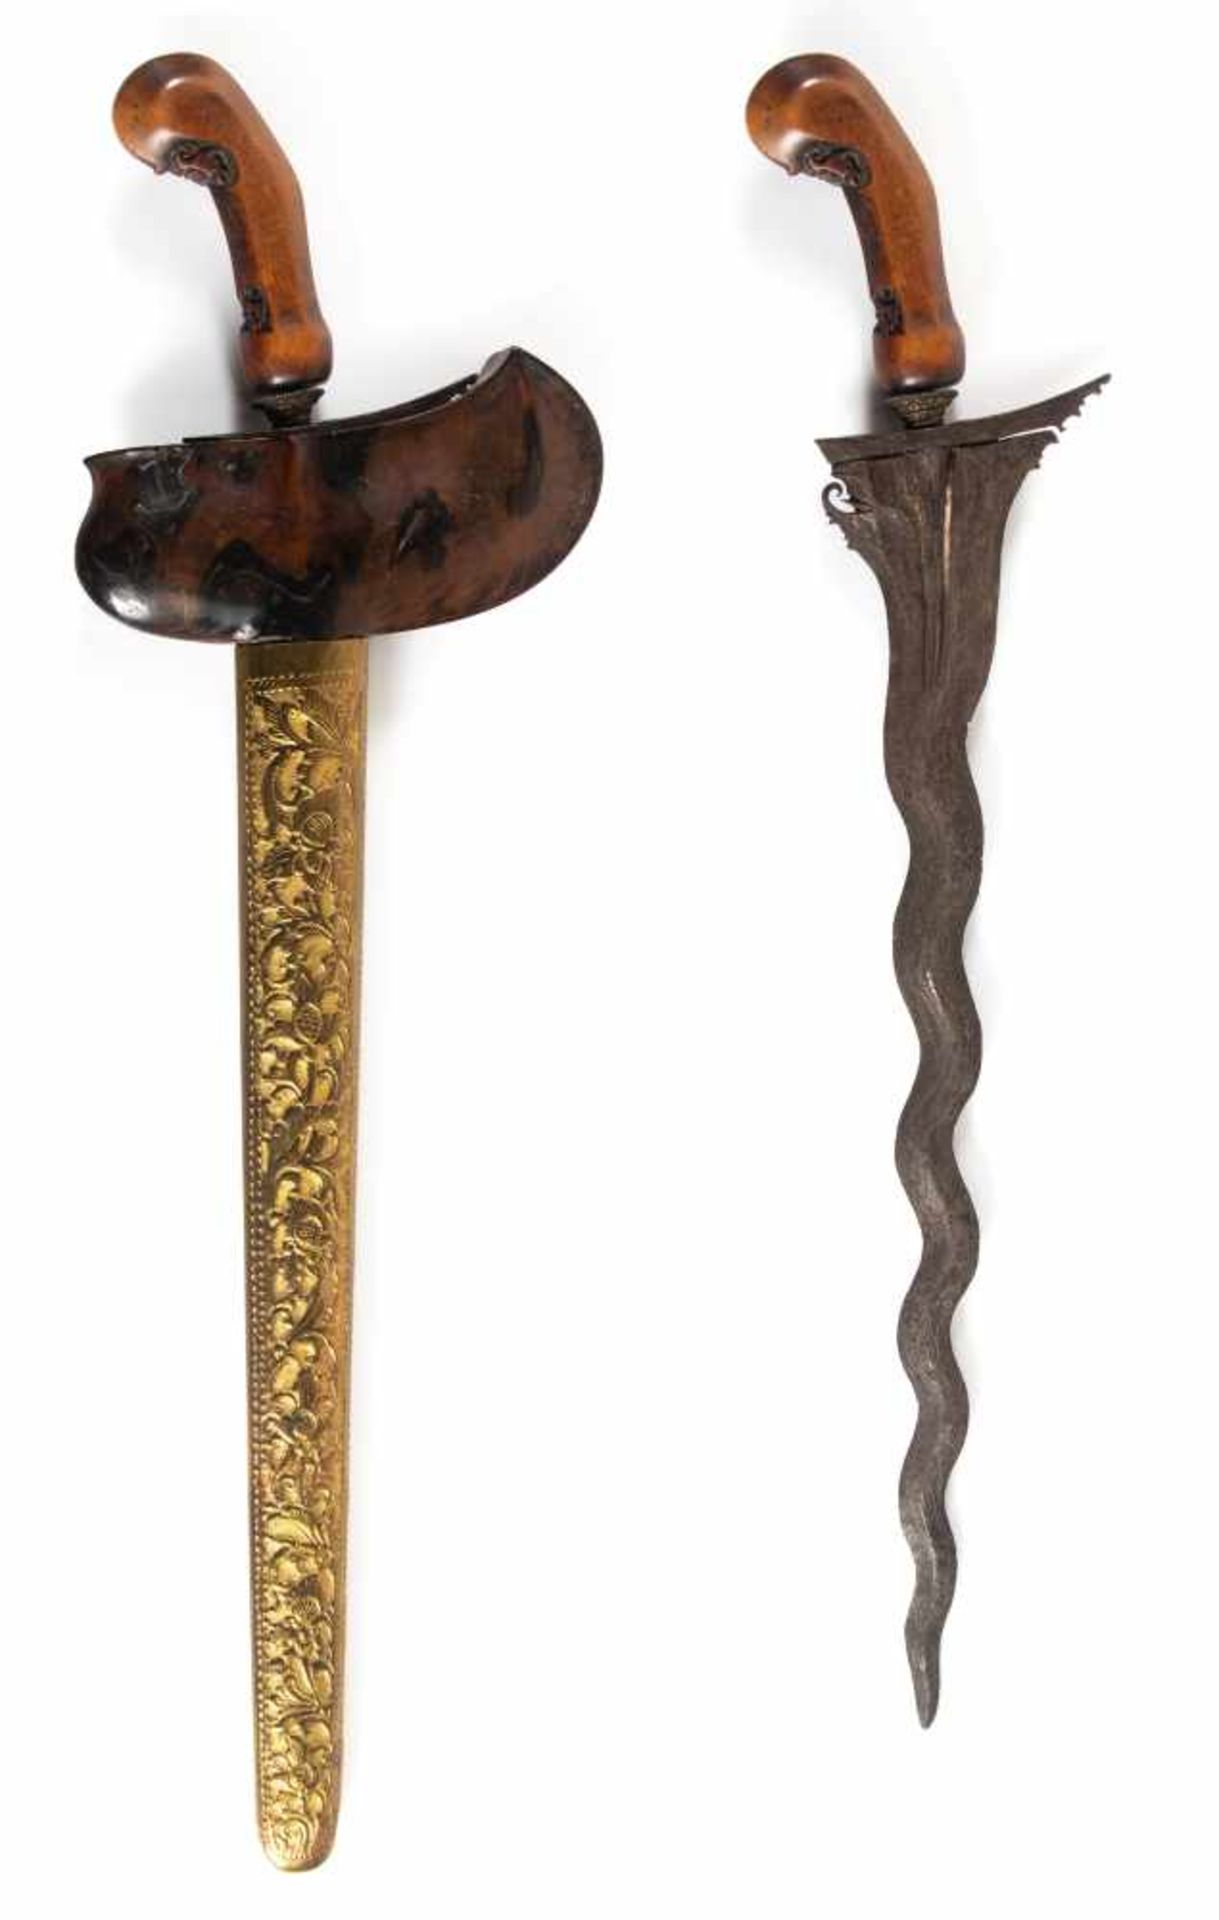 A West Javanese Keris, with 17th century blade.A West Javanese Keris, with 17th century blade.